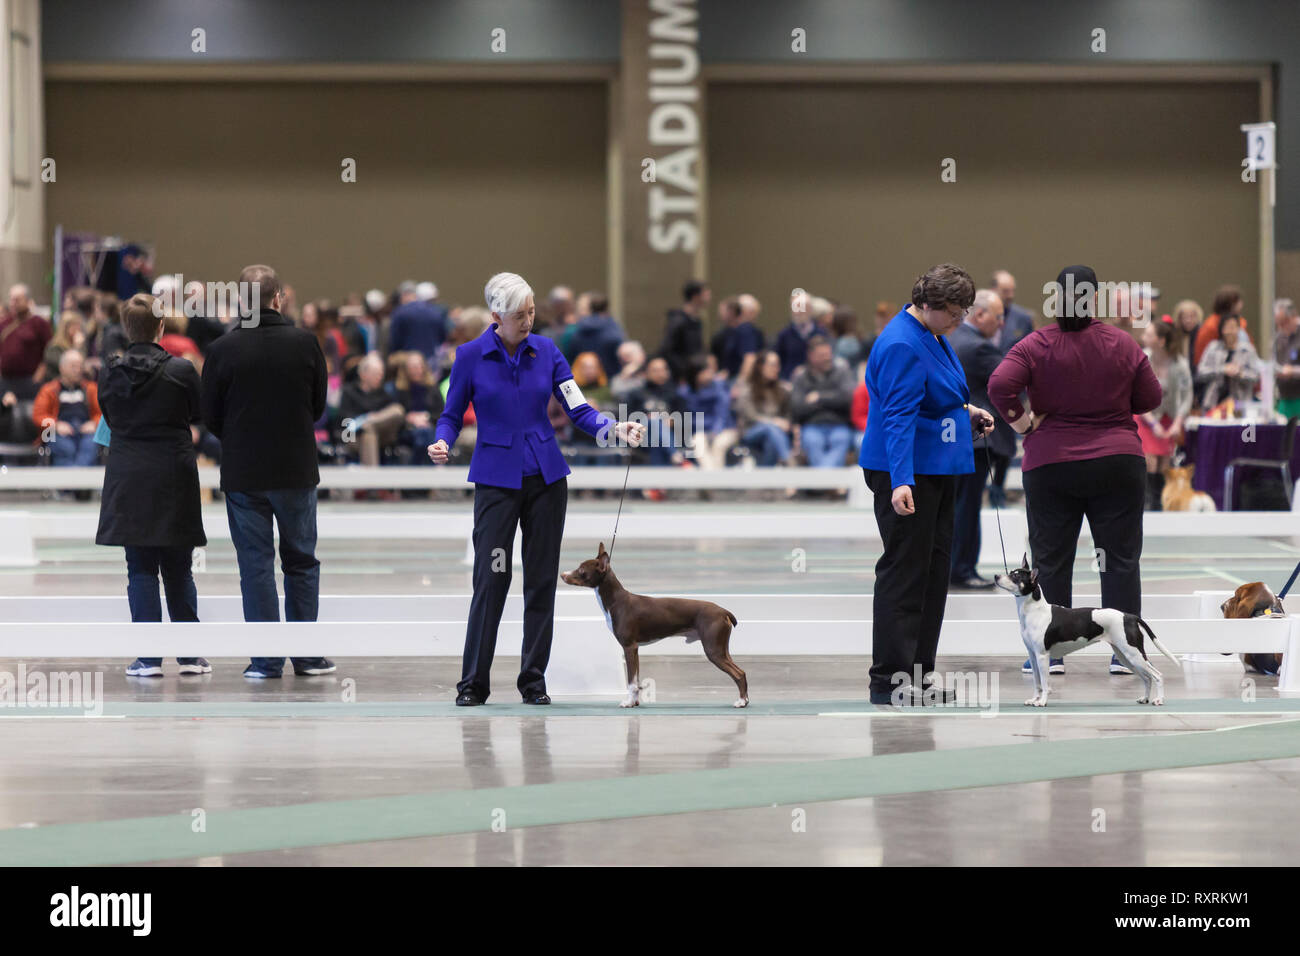 Seattle, USA. 09th Mar, 2019. Miniature Pinschers with their handlers in the ring at the 2019 Seattle Kennel Club Dog Show. Approximately 160 different breeds participate in the annual All-Breed dog show. Credit: Paul Christian Gordon/Alamy Live News Stock Photo